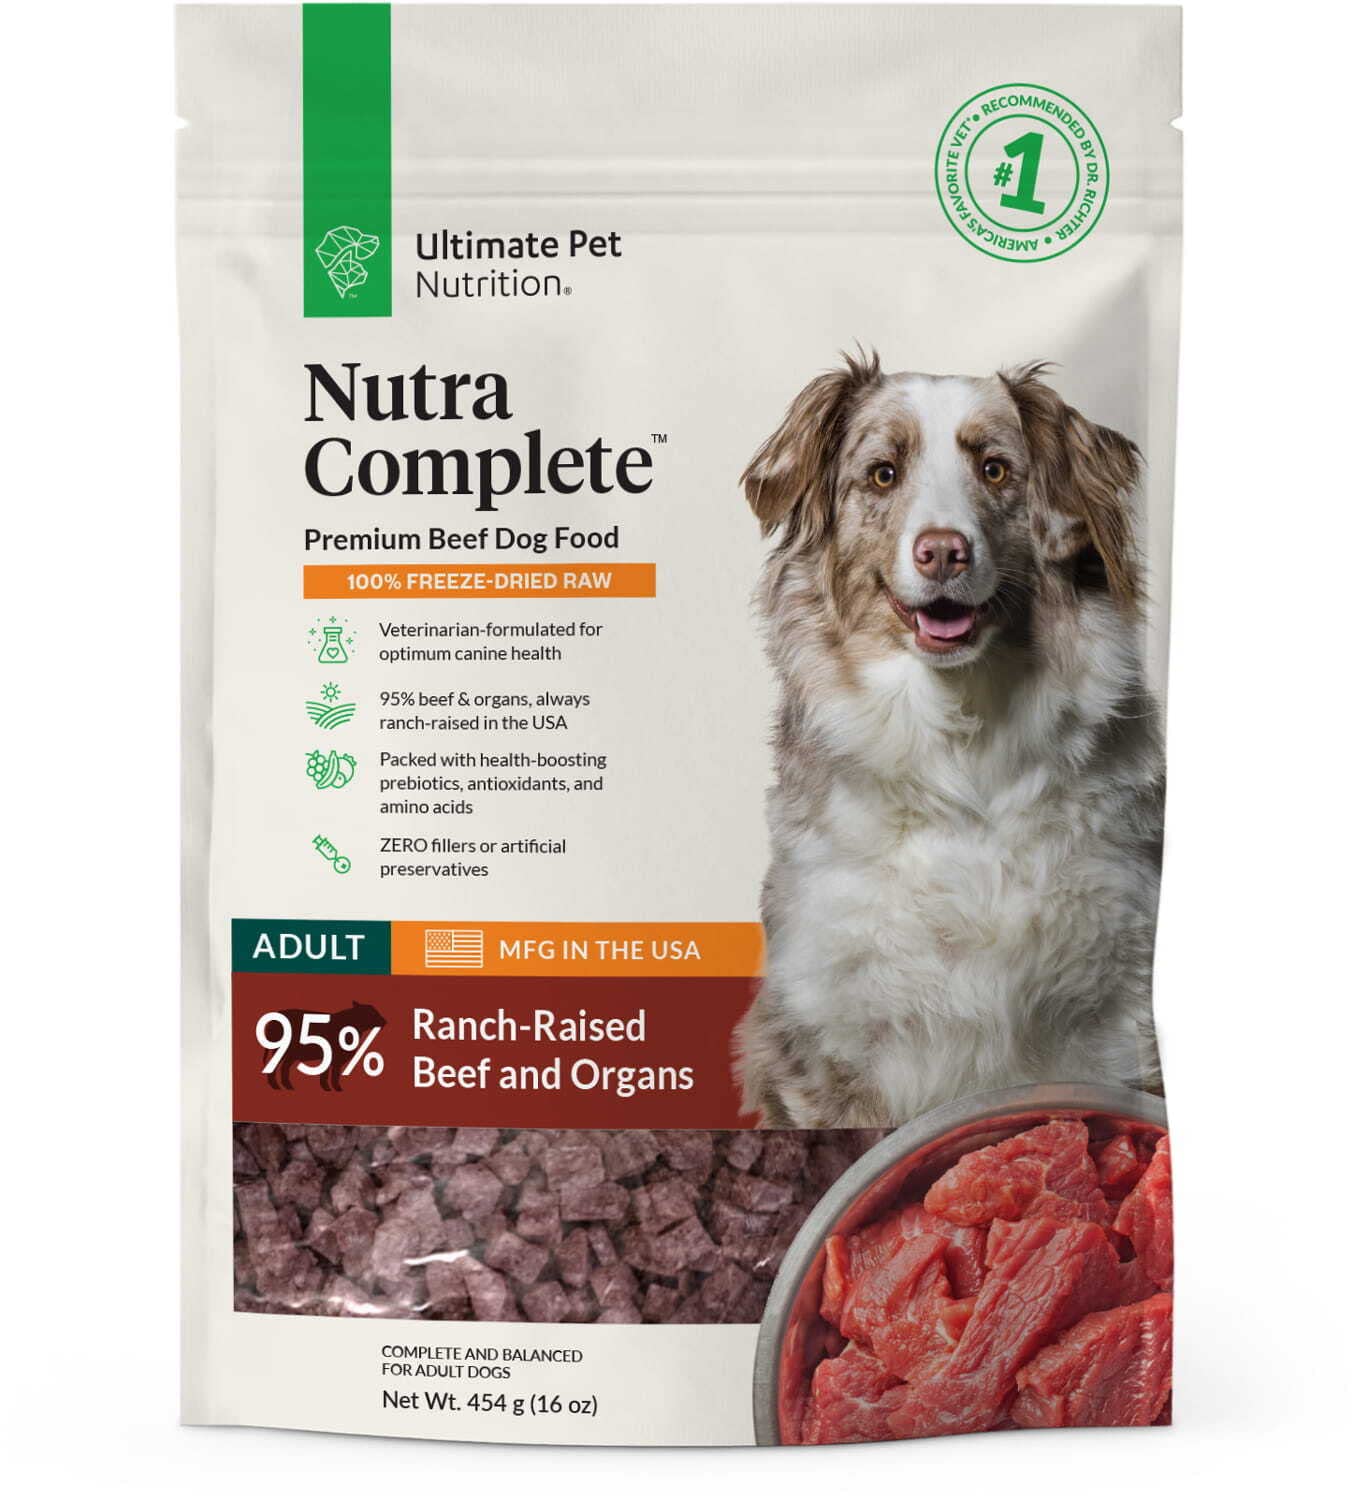 Where to Buy Nutra Complete Dog Food?